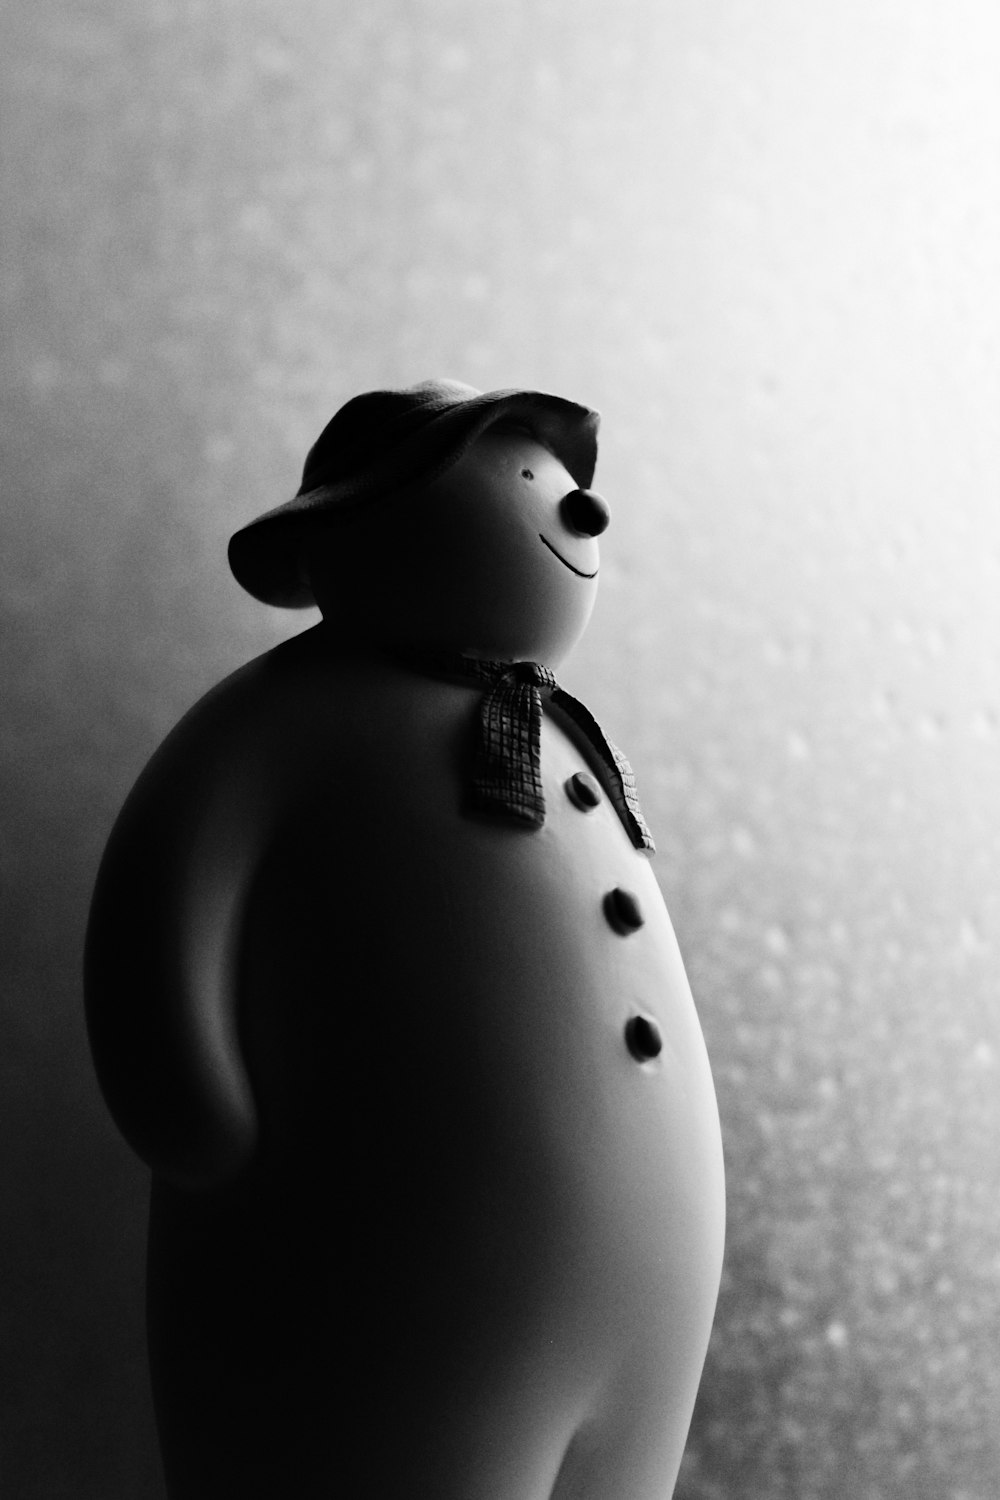 grayscale photography of snowman figurine